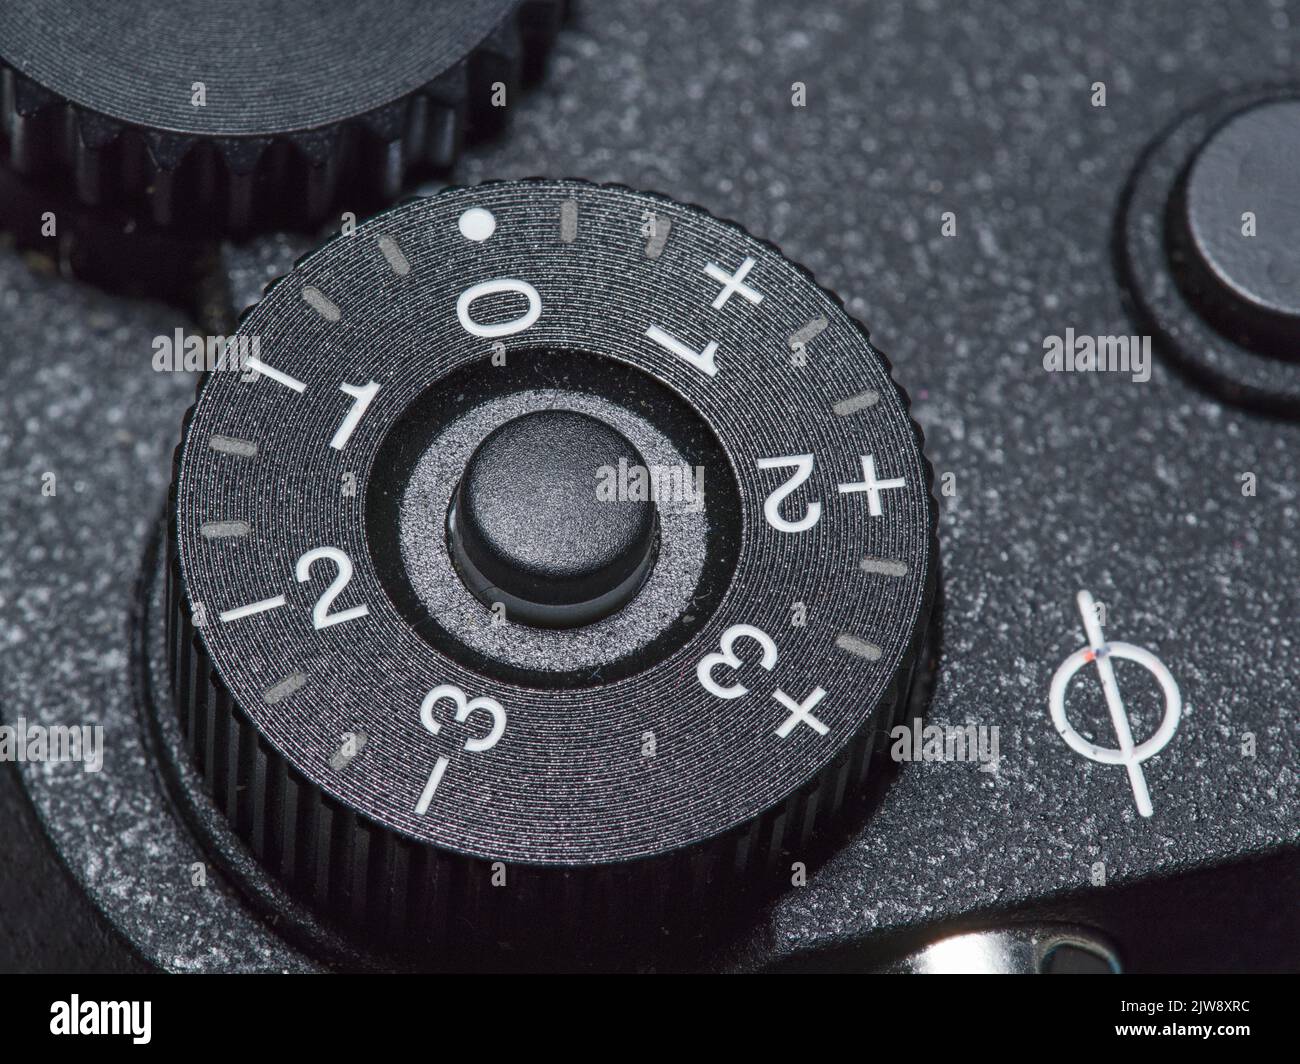 manual exposure compensation dial on a camera with one third increments to three stops. Stock Photo